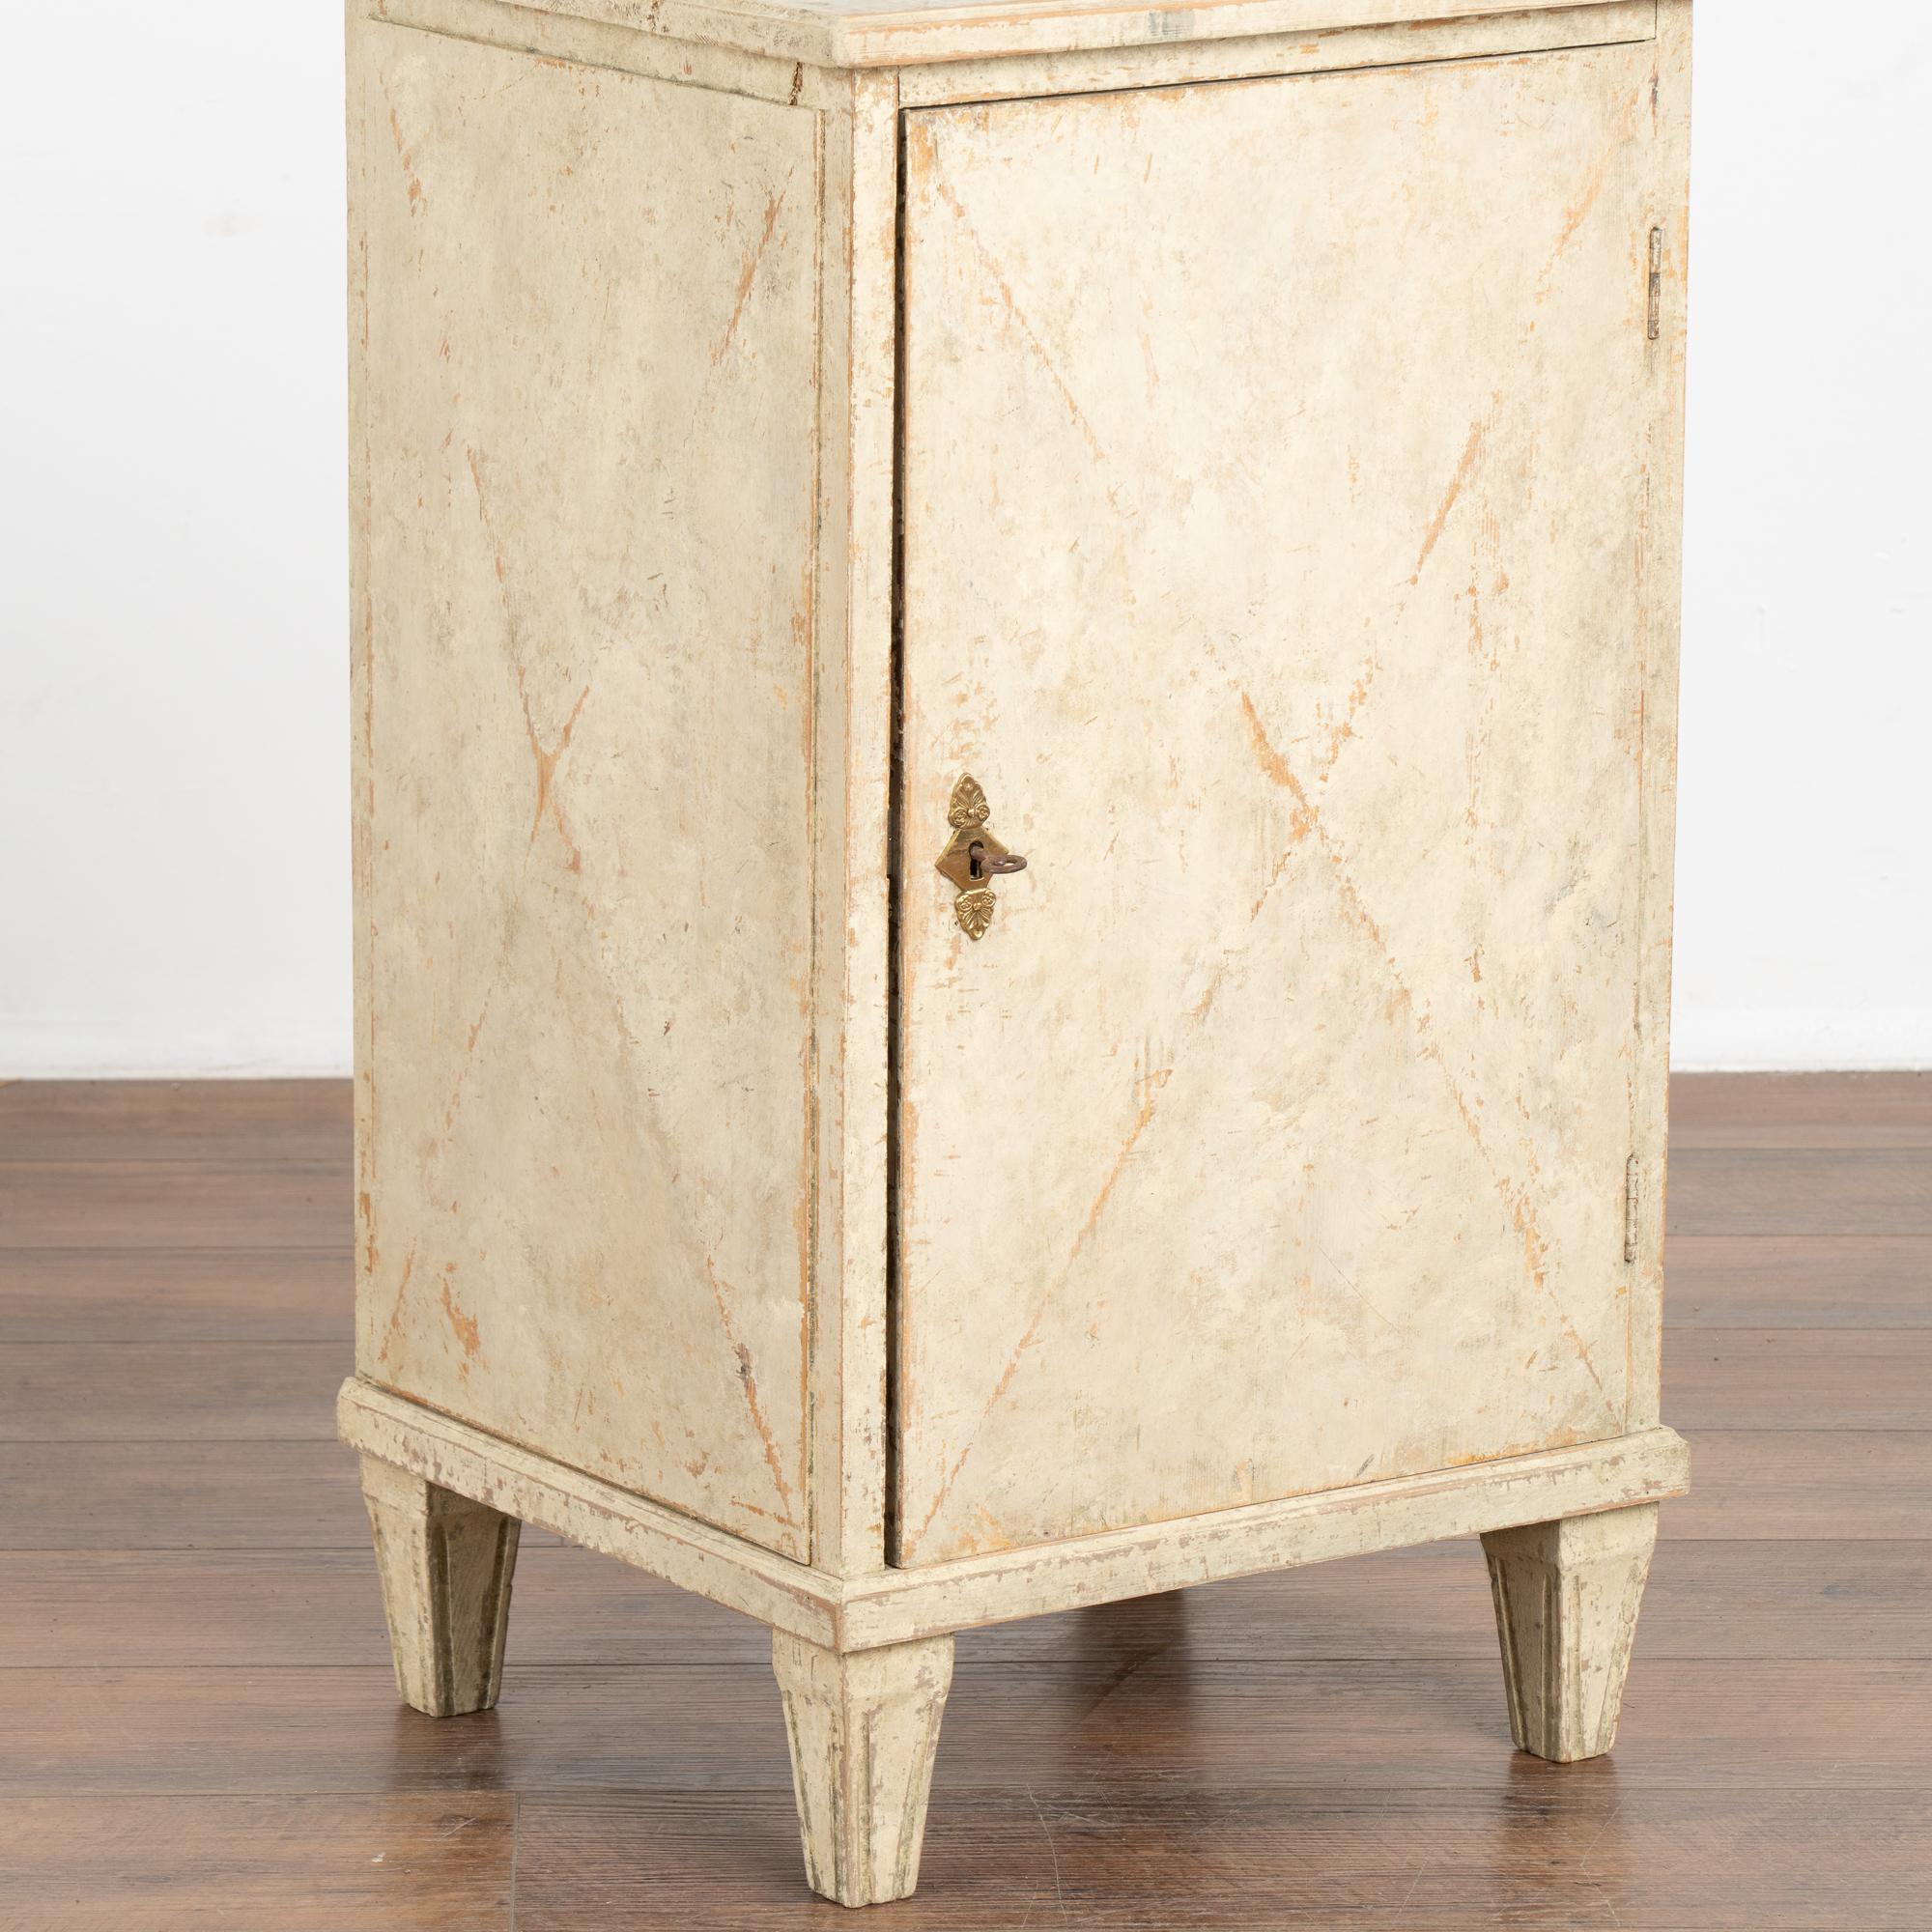 Wood White Painted Small Cabinet or Sheet Music Cabinet, Sweden circa 1860-80 For Sale